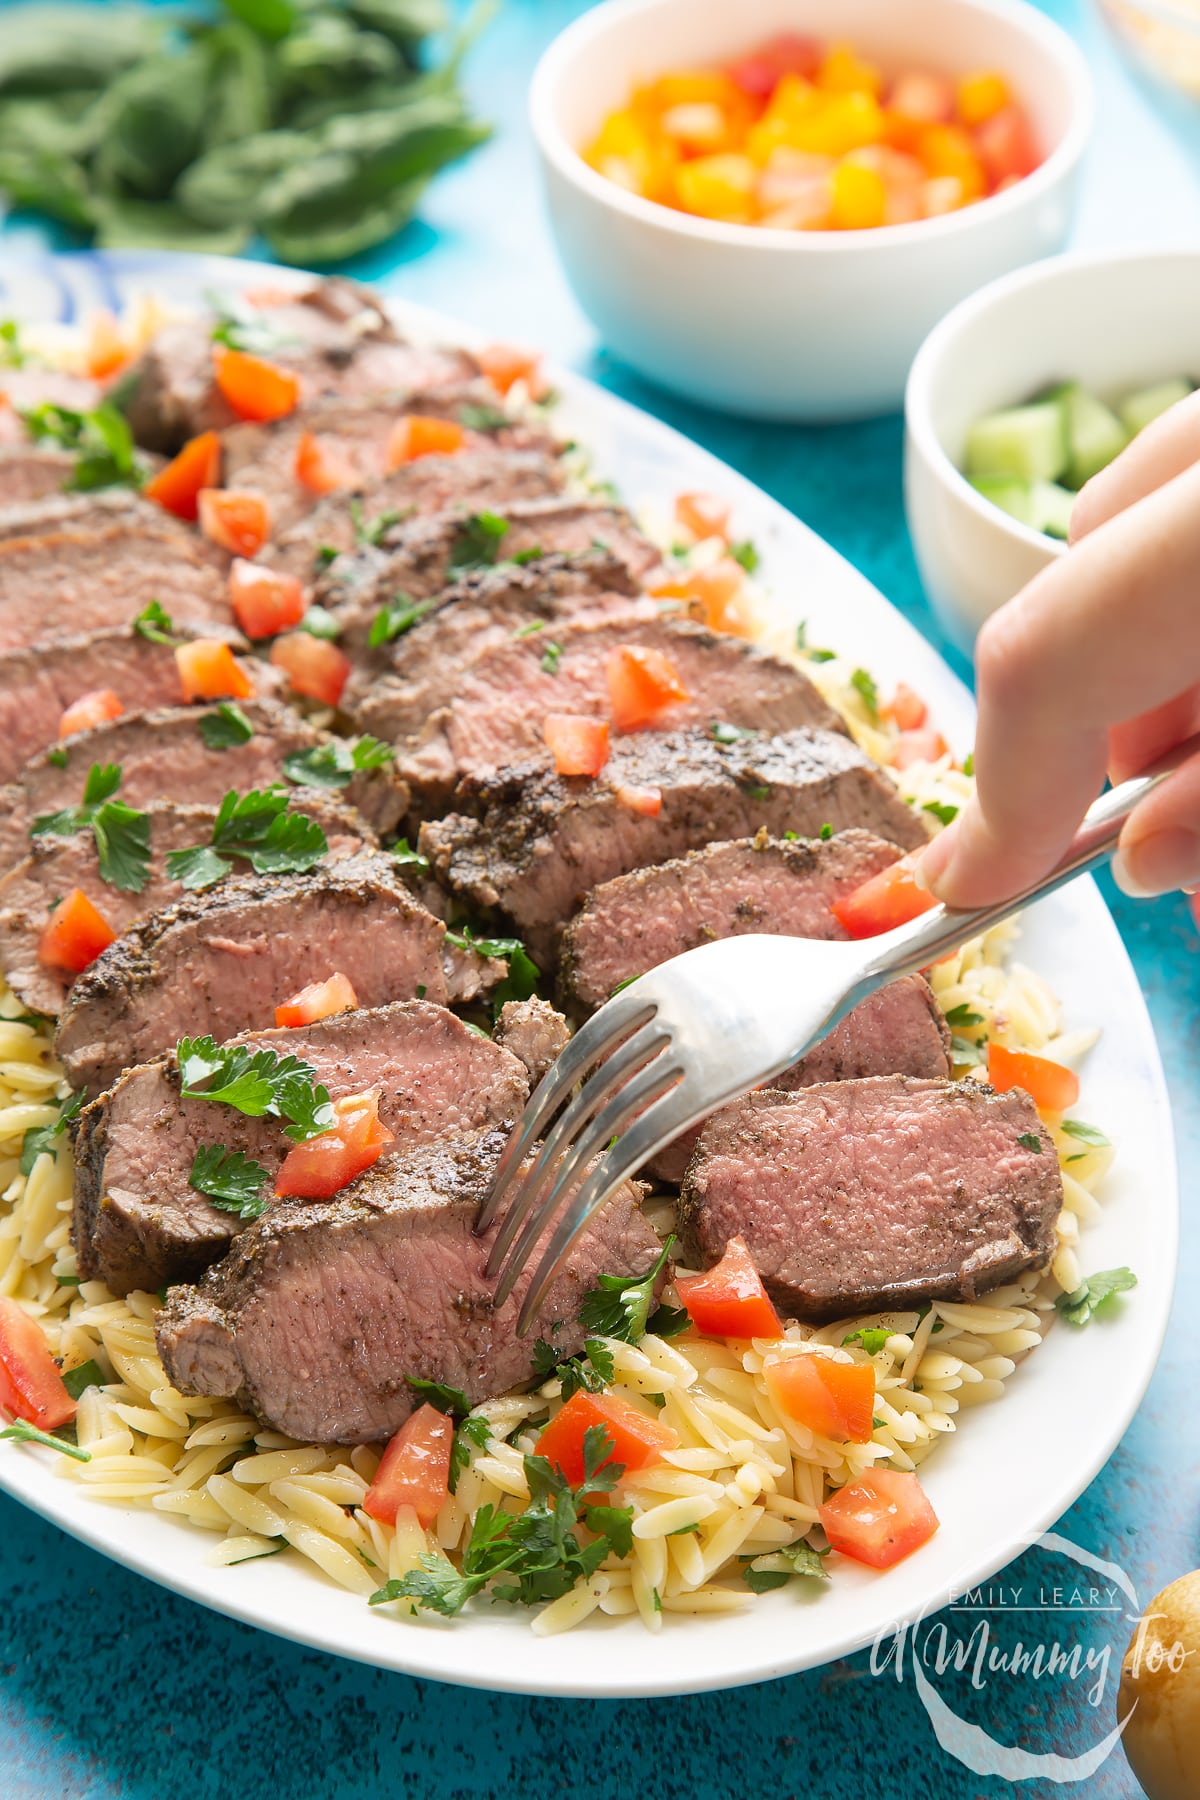 Slices of herby lamb arranged on a bed of orzo on an oval platter. A hand with a fork delves in.